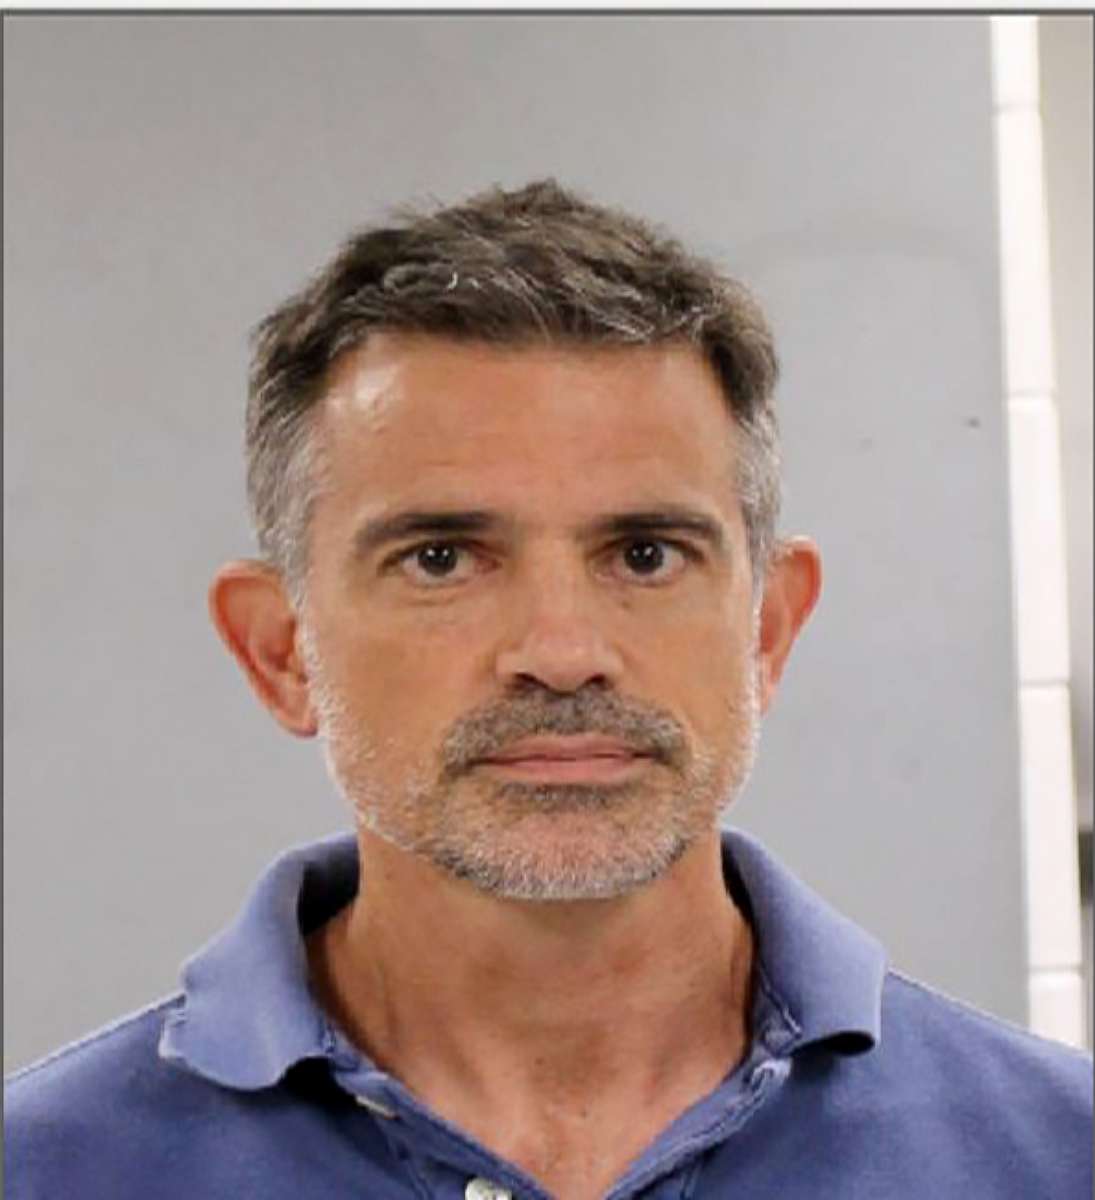 PHOTO: Fotis Dulos, the estranged husband of missing Connecticut mom Jennifer Dulos, was charged with capital murder, murder and kidnapping.